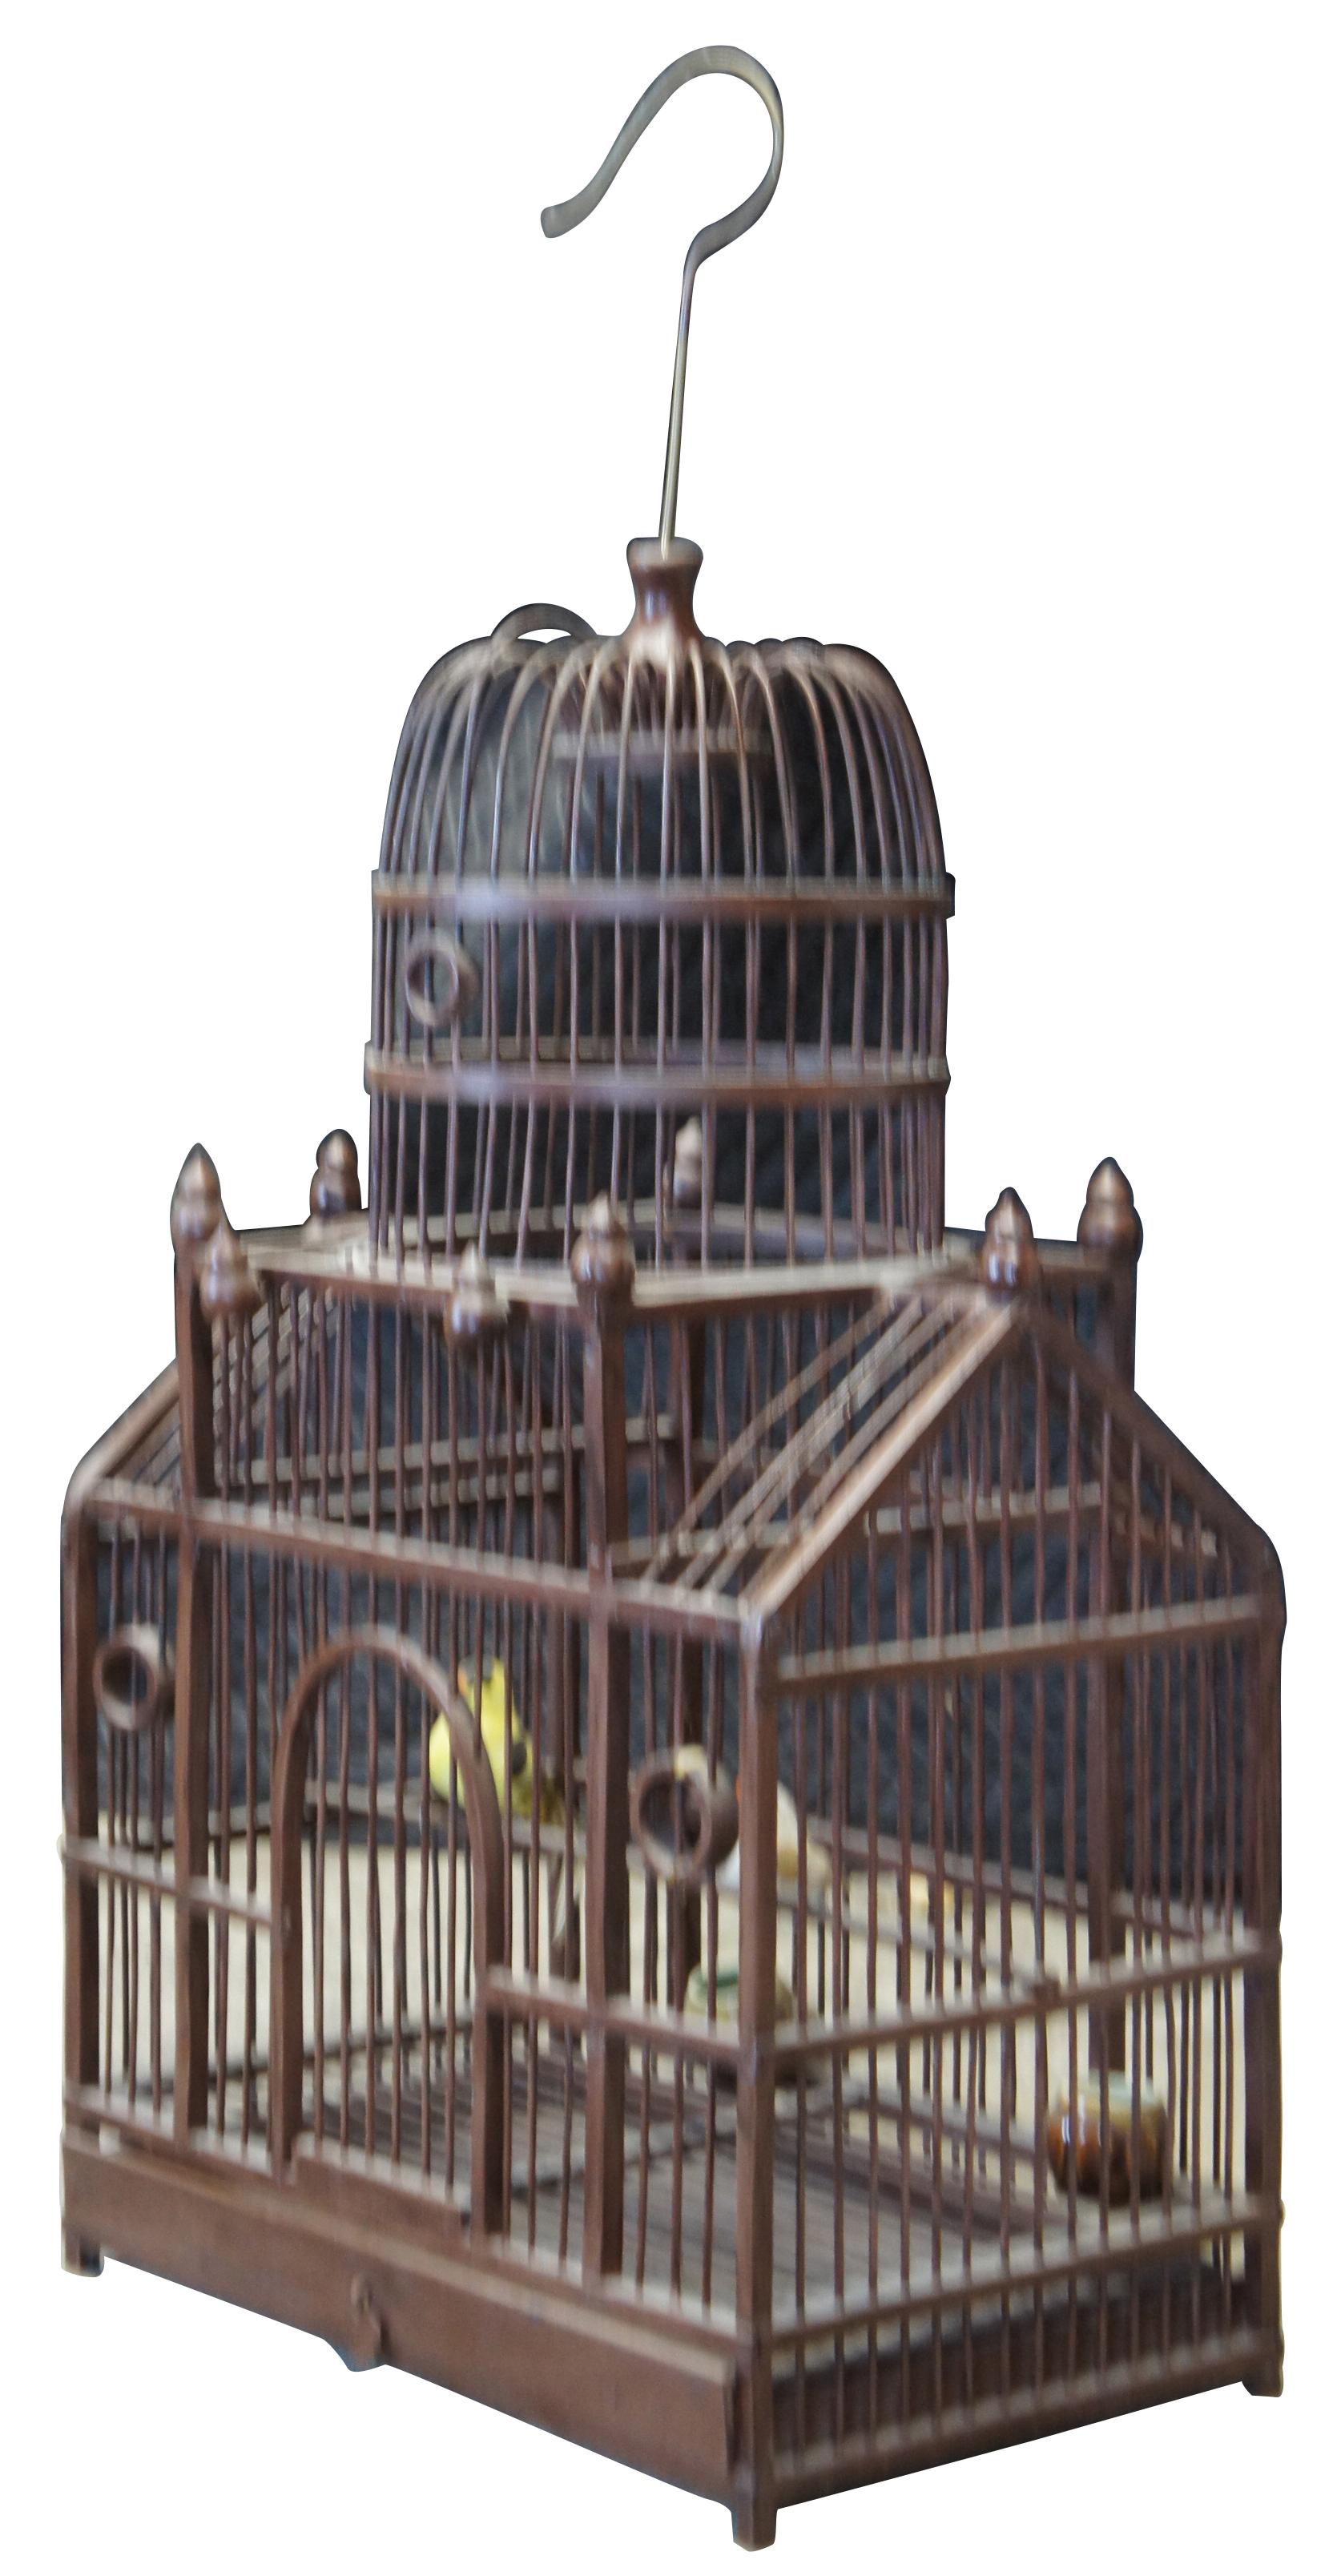 Victorian revival bird cage featuring a domed top, circular windows and turned finials.  Includes two faux birds and two ceramic feeder bowls.

DIMENSIONS

15.5